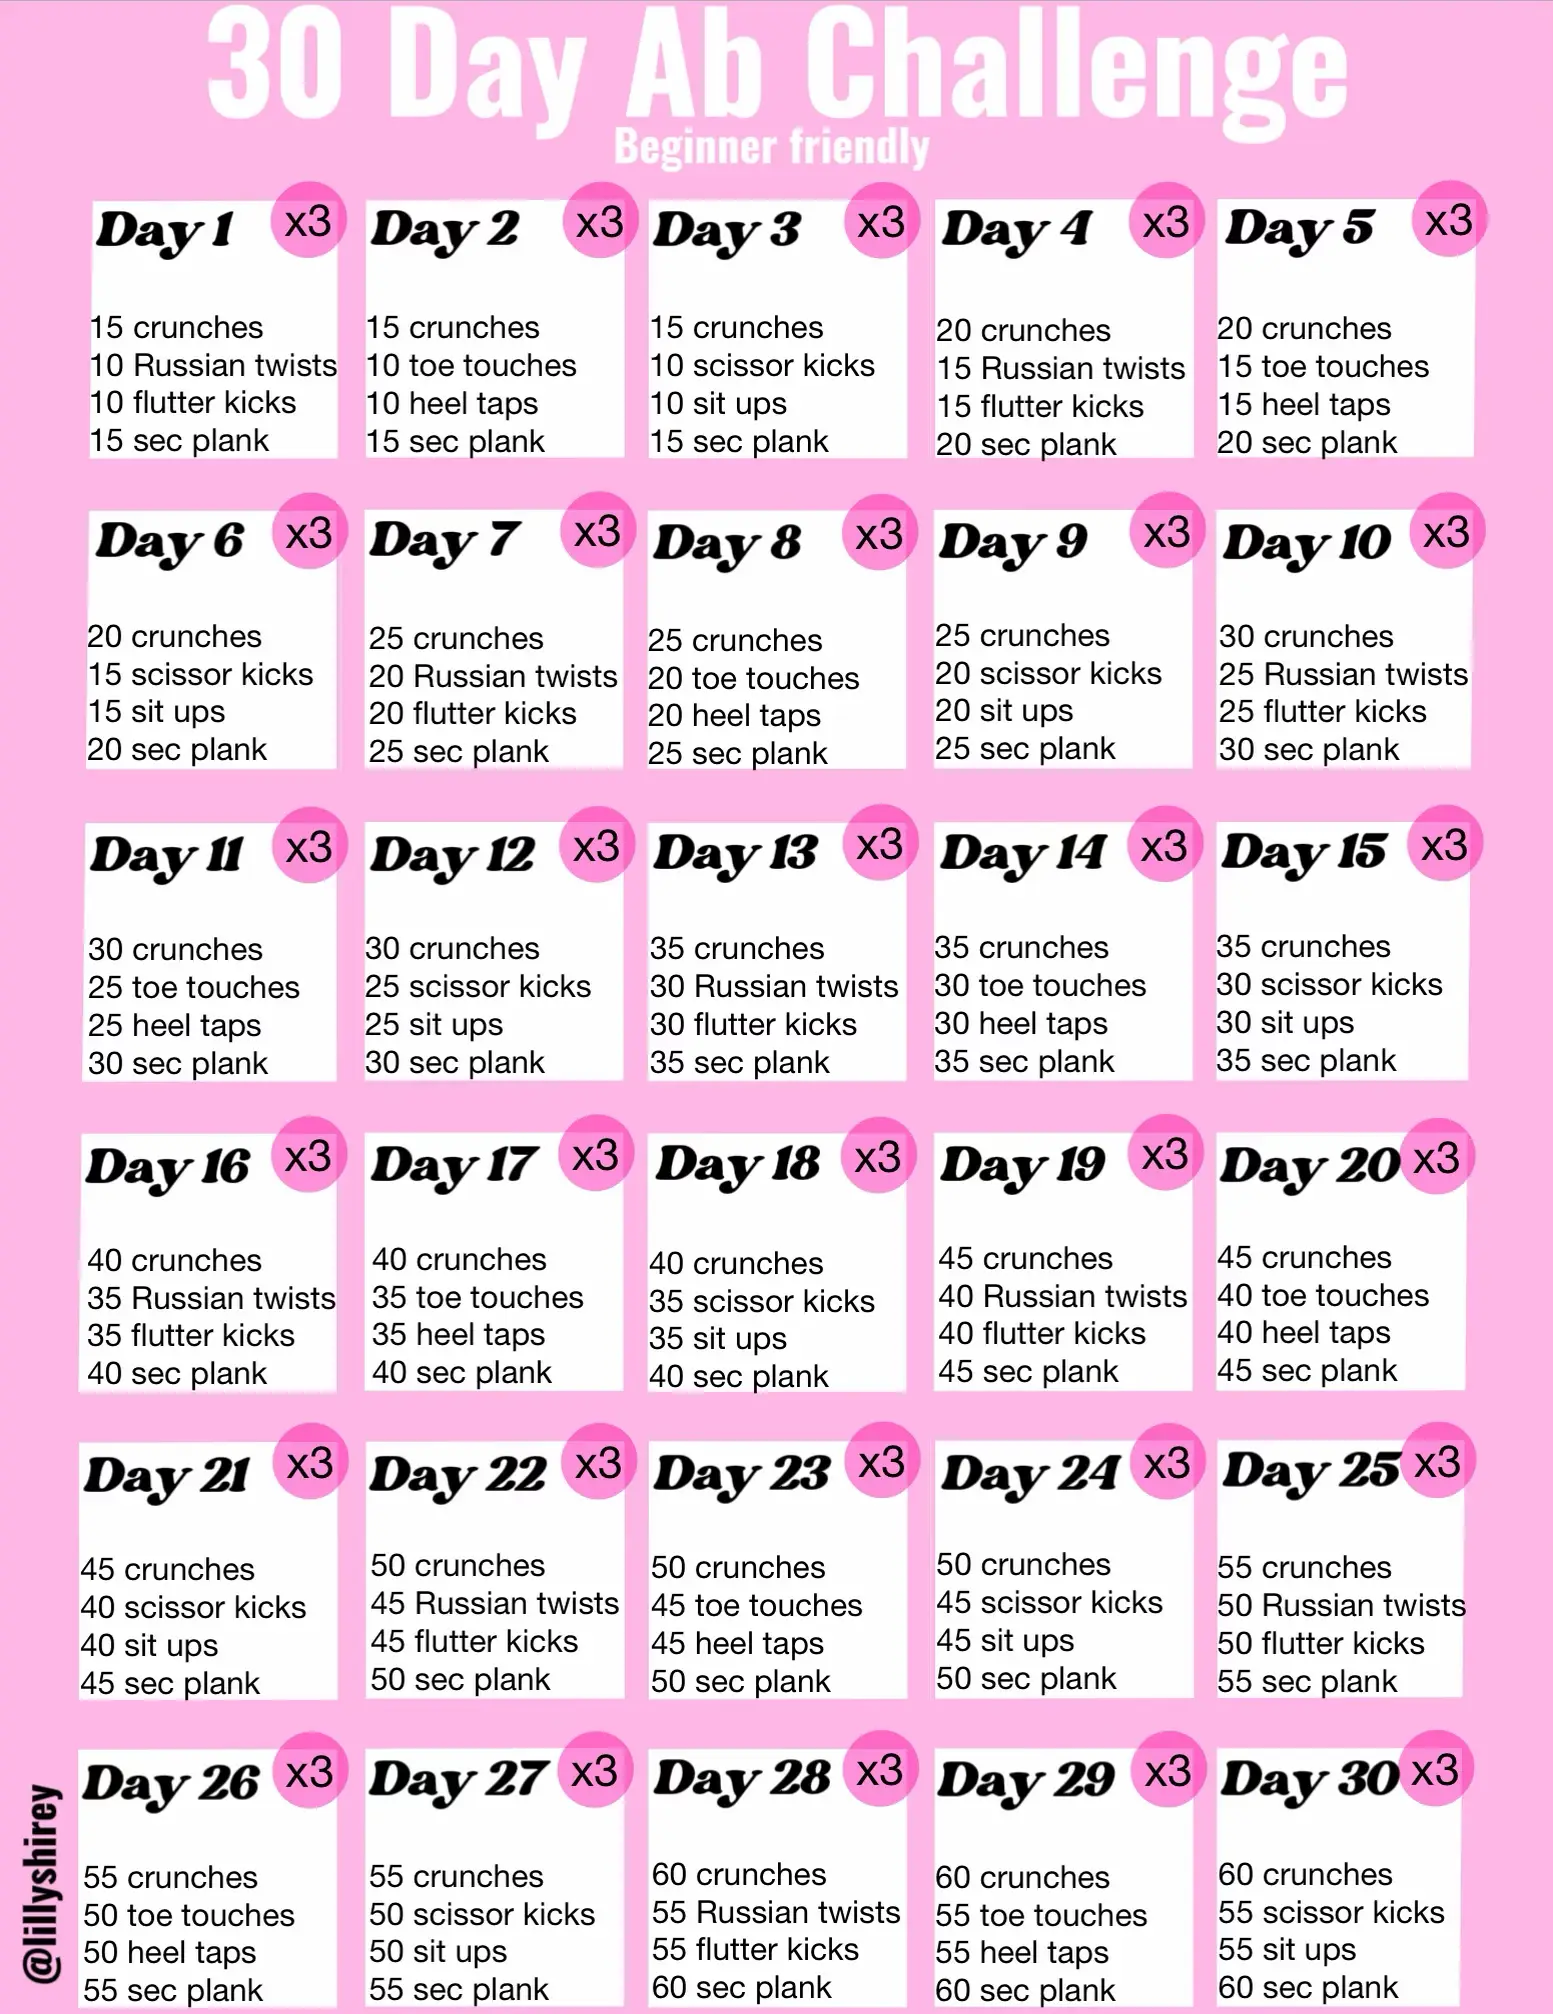 FIT FRIDAY: LAGREE FITNESS + 30 DAY ABS CHALLENGE